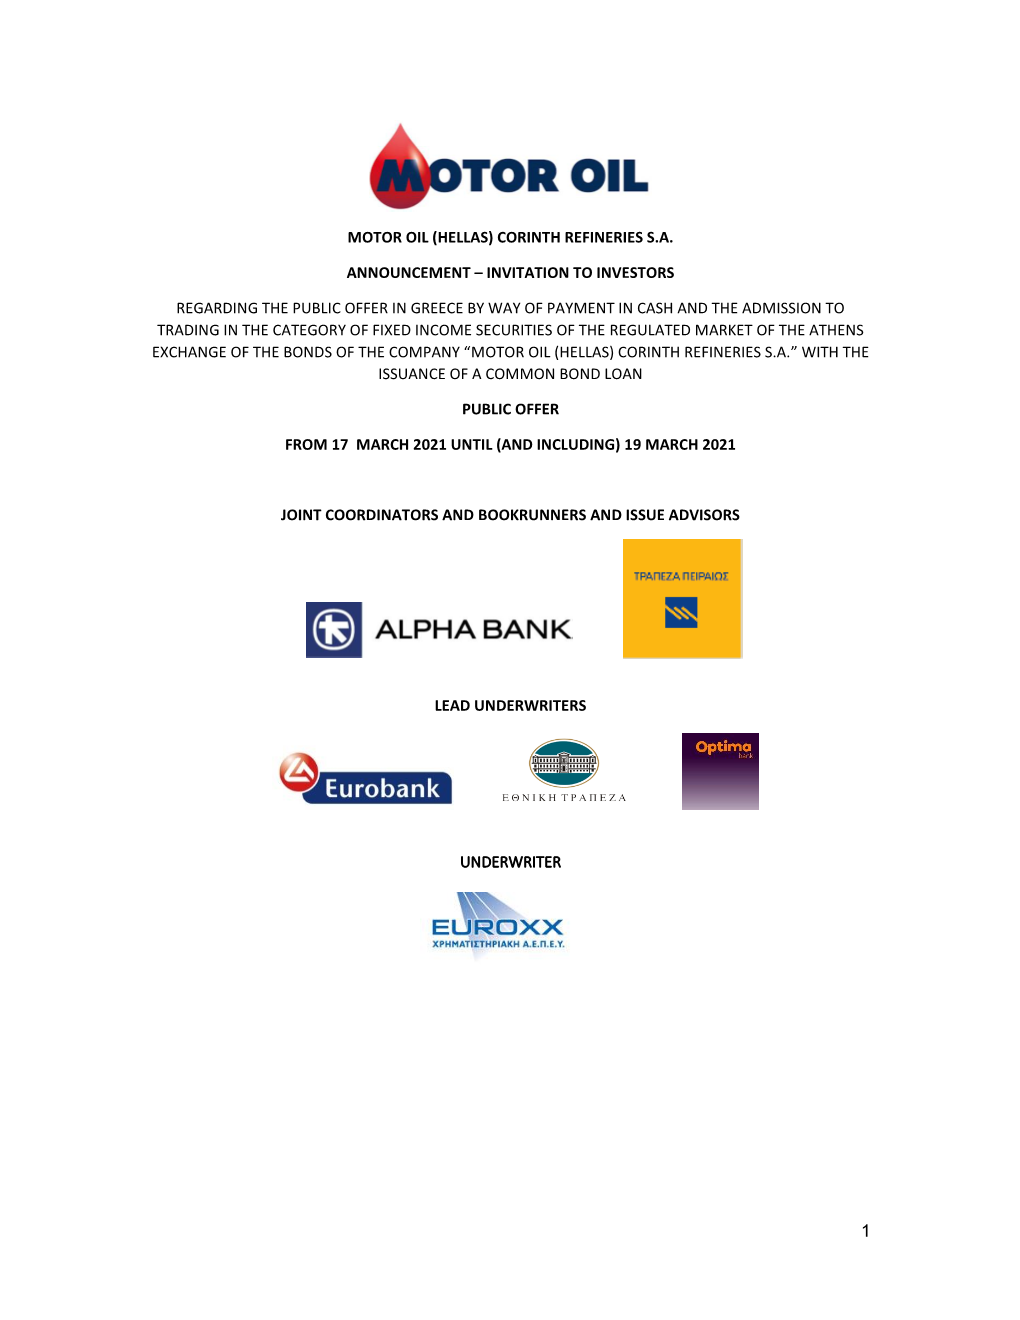 Motor Oil (Hellas) Corinth Refineries S.A. Announcement – Invitation to Investors Regarding the Public Offer in Greece By